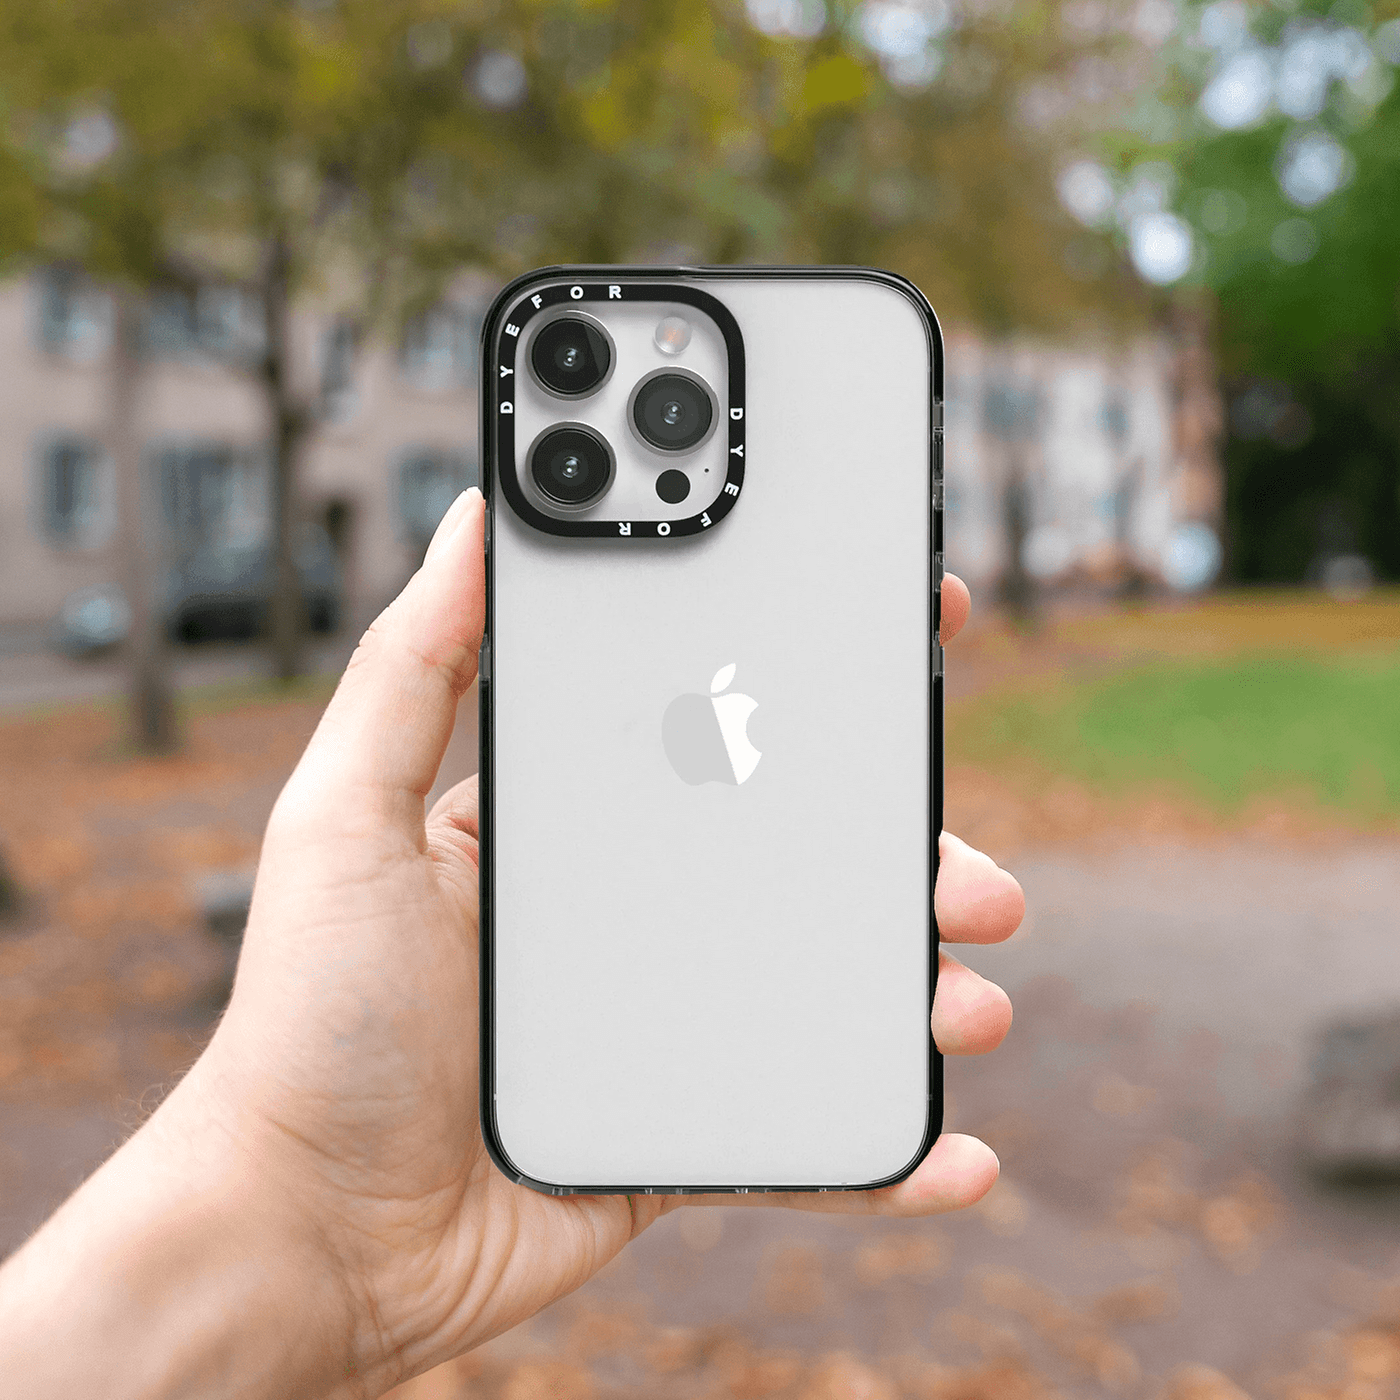 CASETiFY Camera Lens Protector for iPhone 14/14 Plus